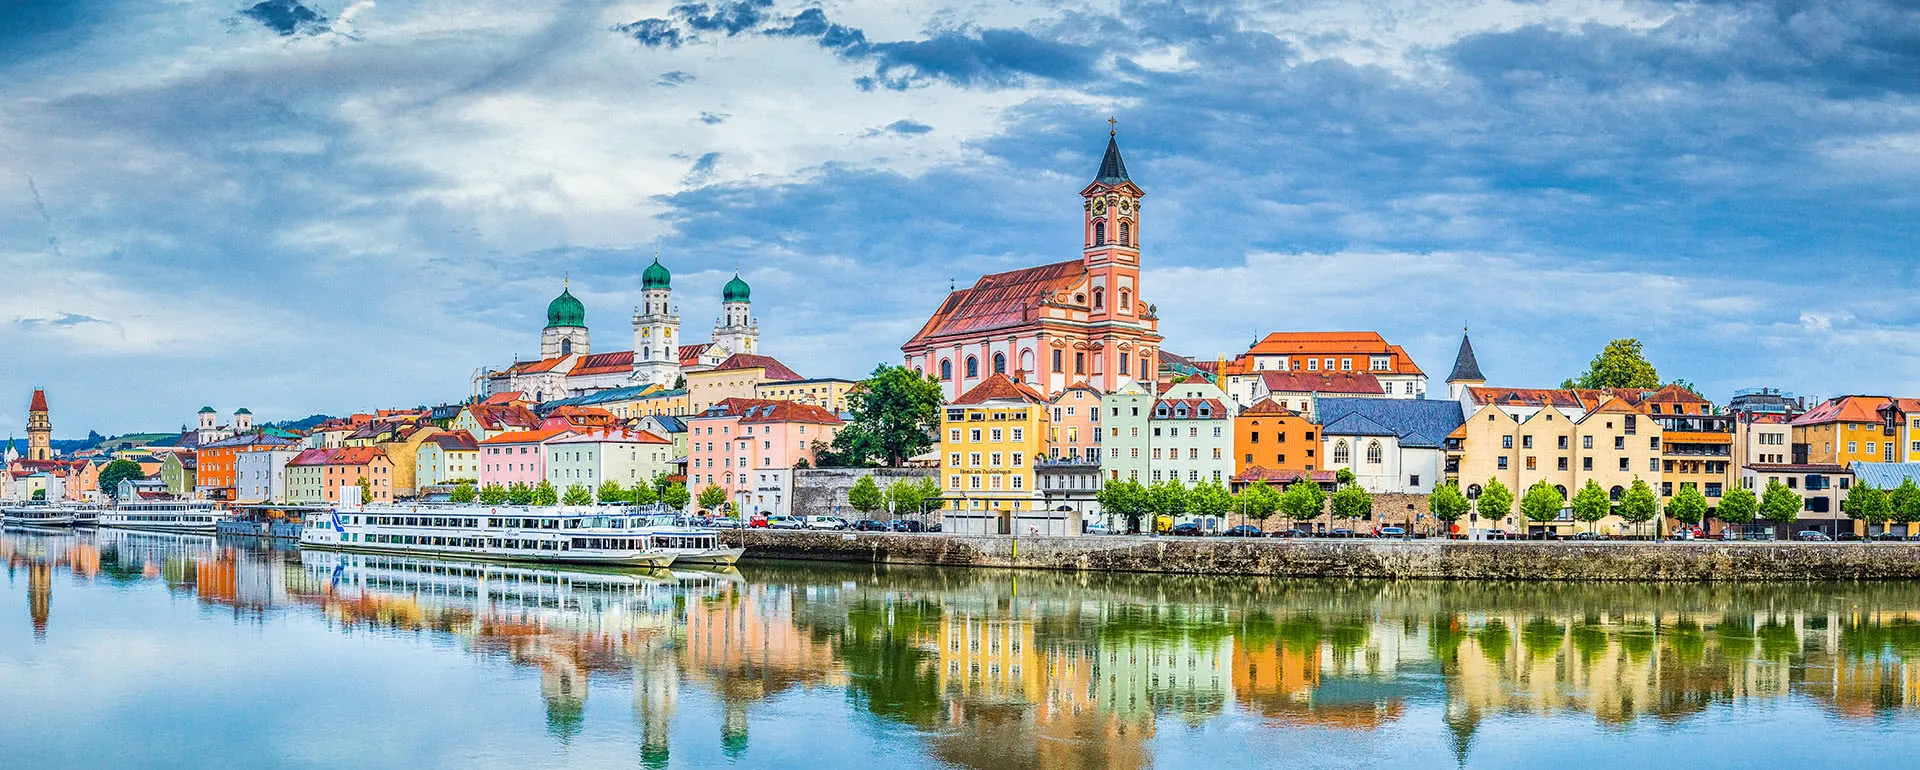 Meeting and conference location Passau